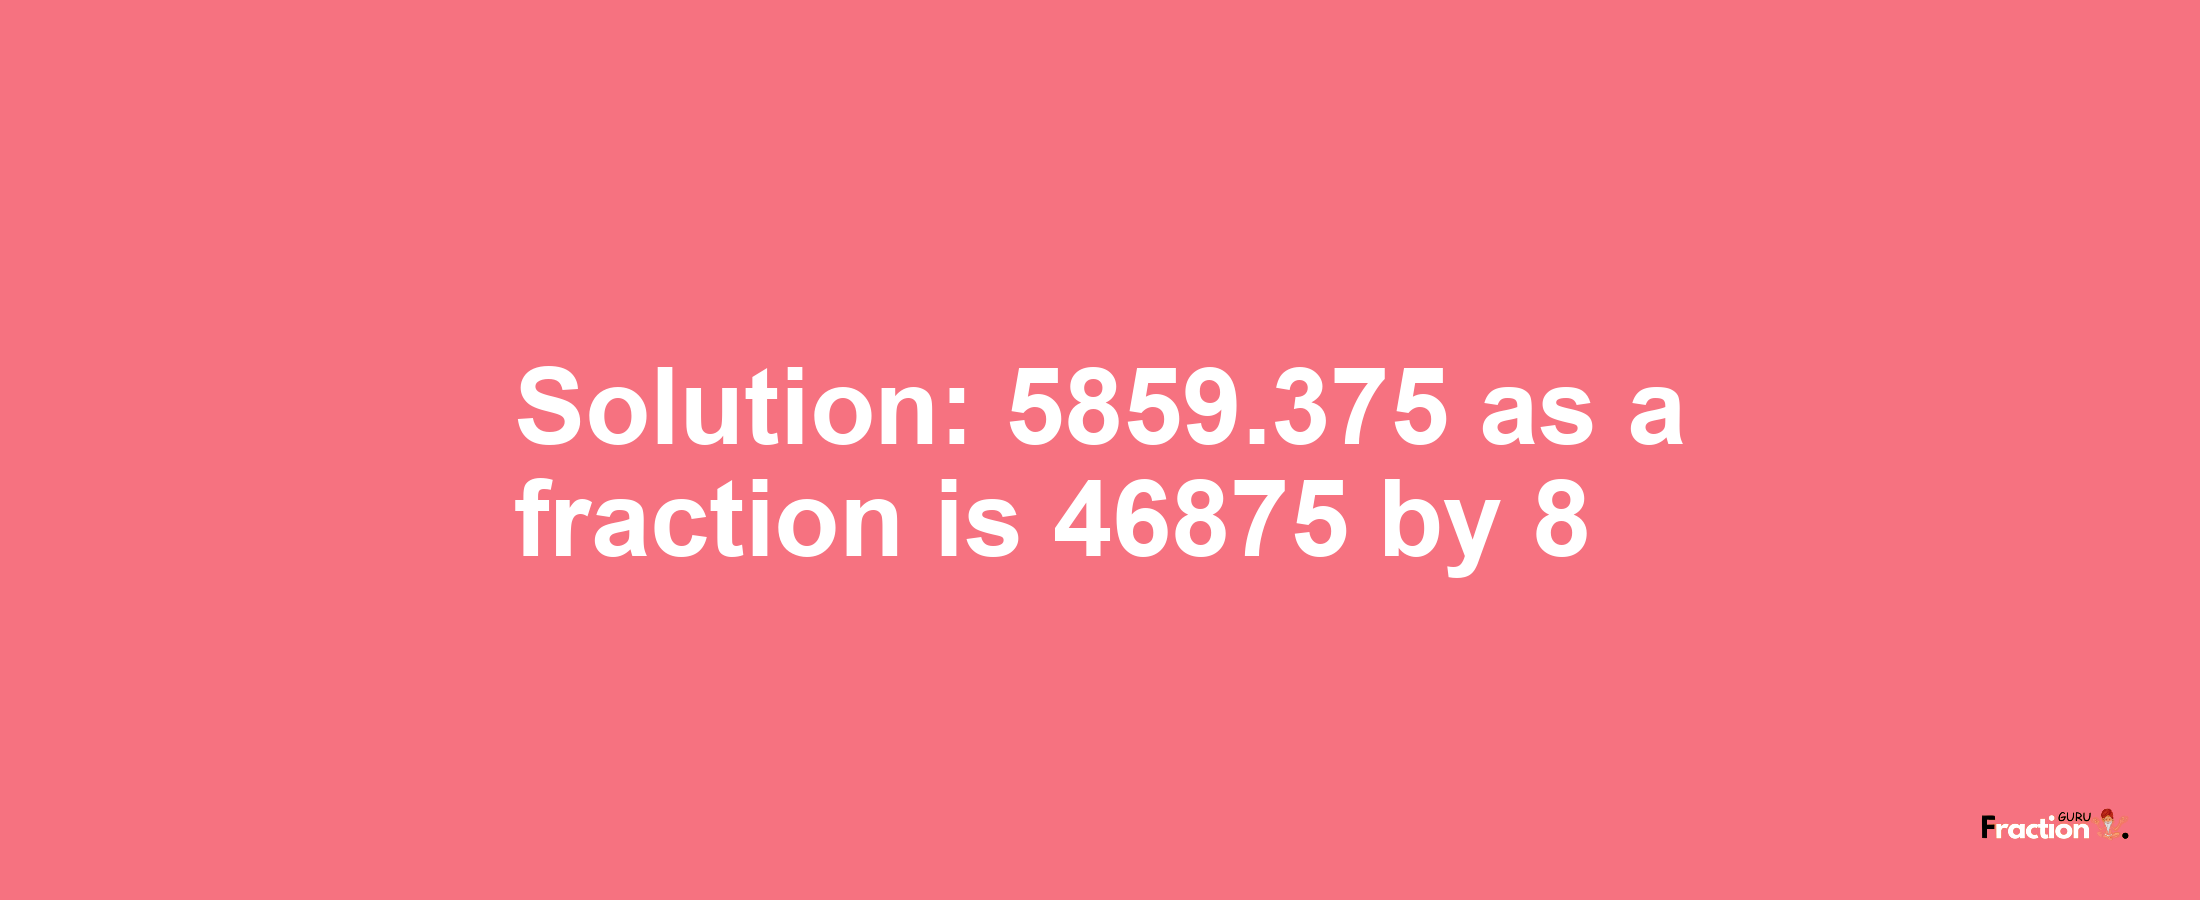 Solution:5859.375 as a fraction is 46875/8